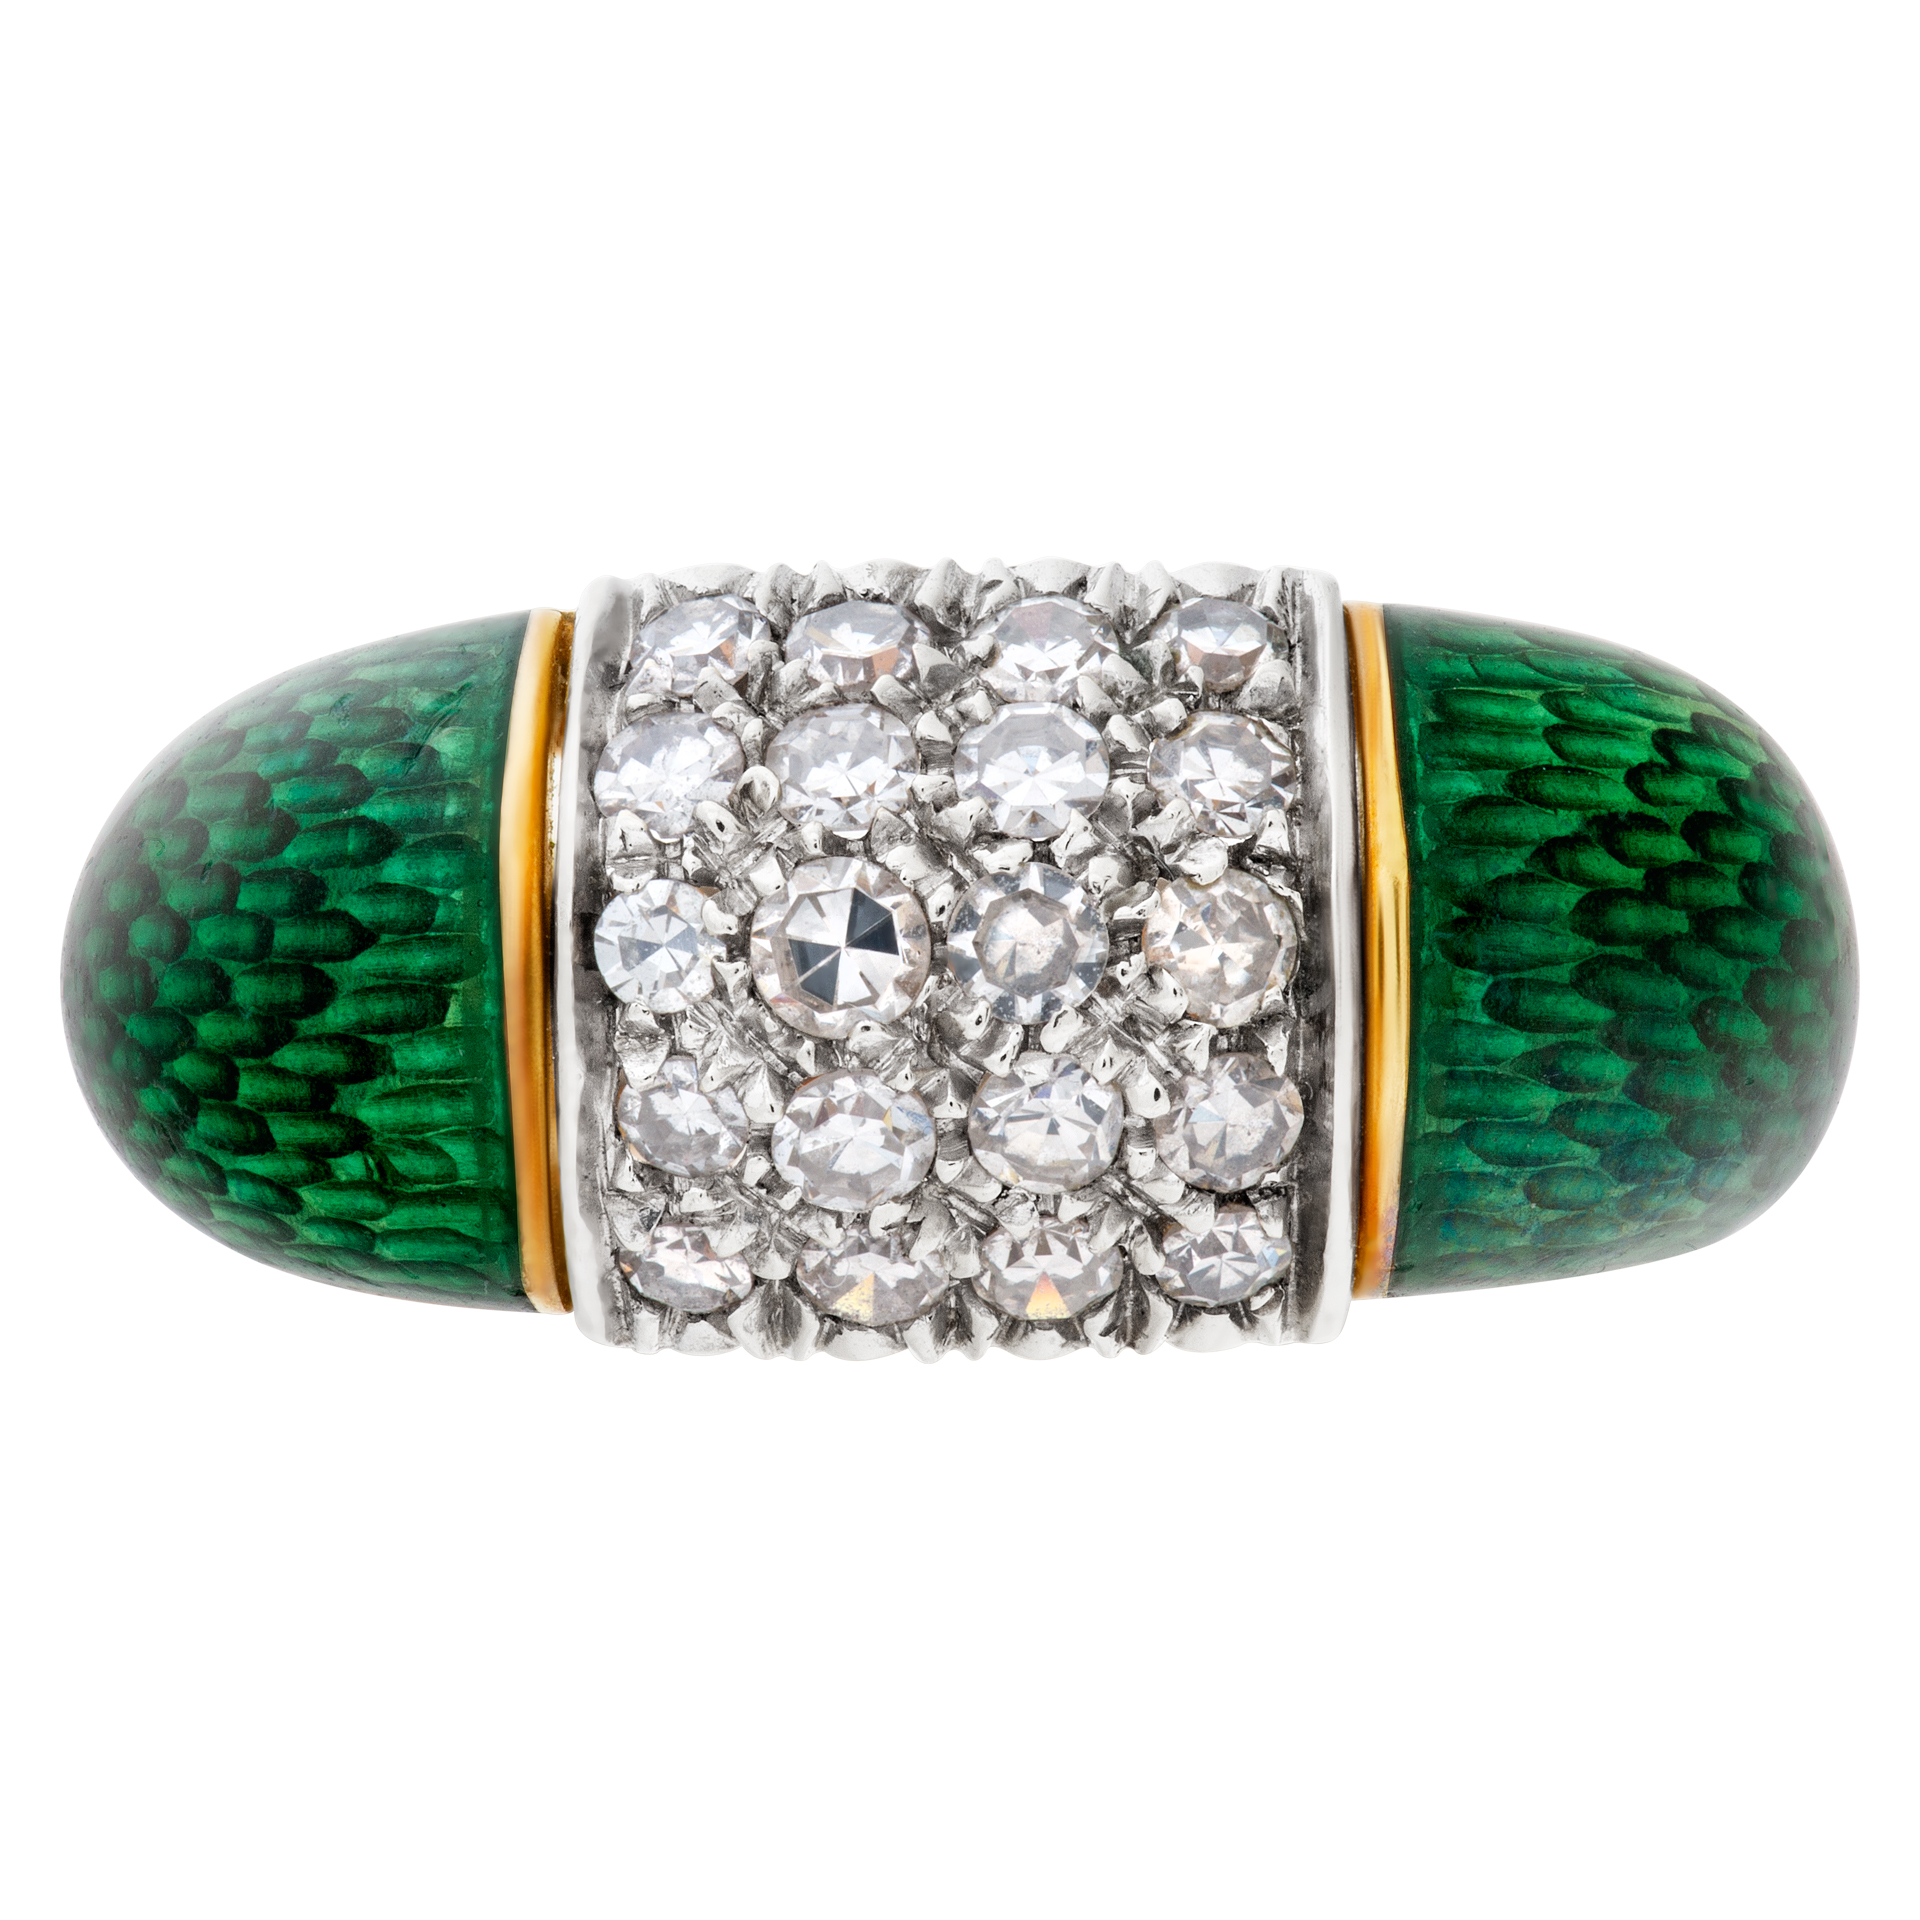 Enamel ring In 18k with pave diamonds. Size 4.5 image 2